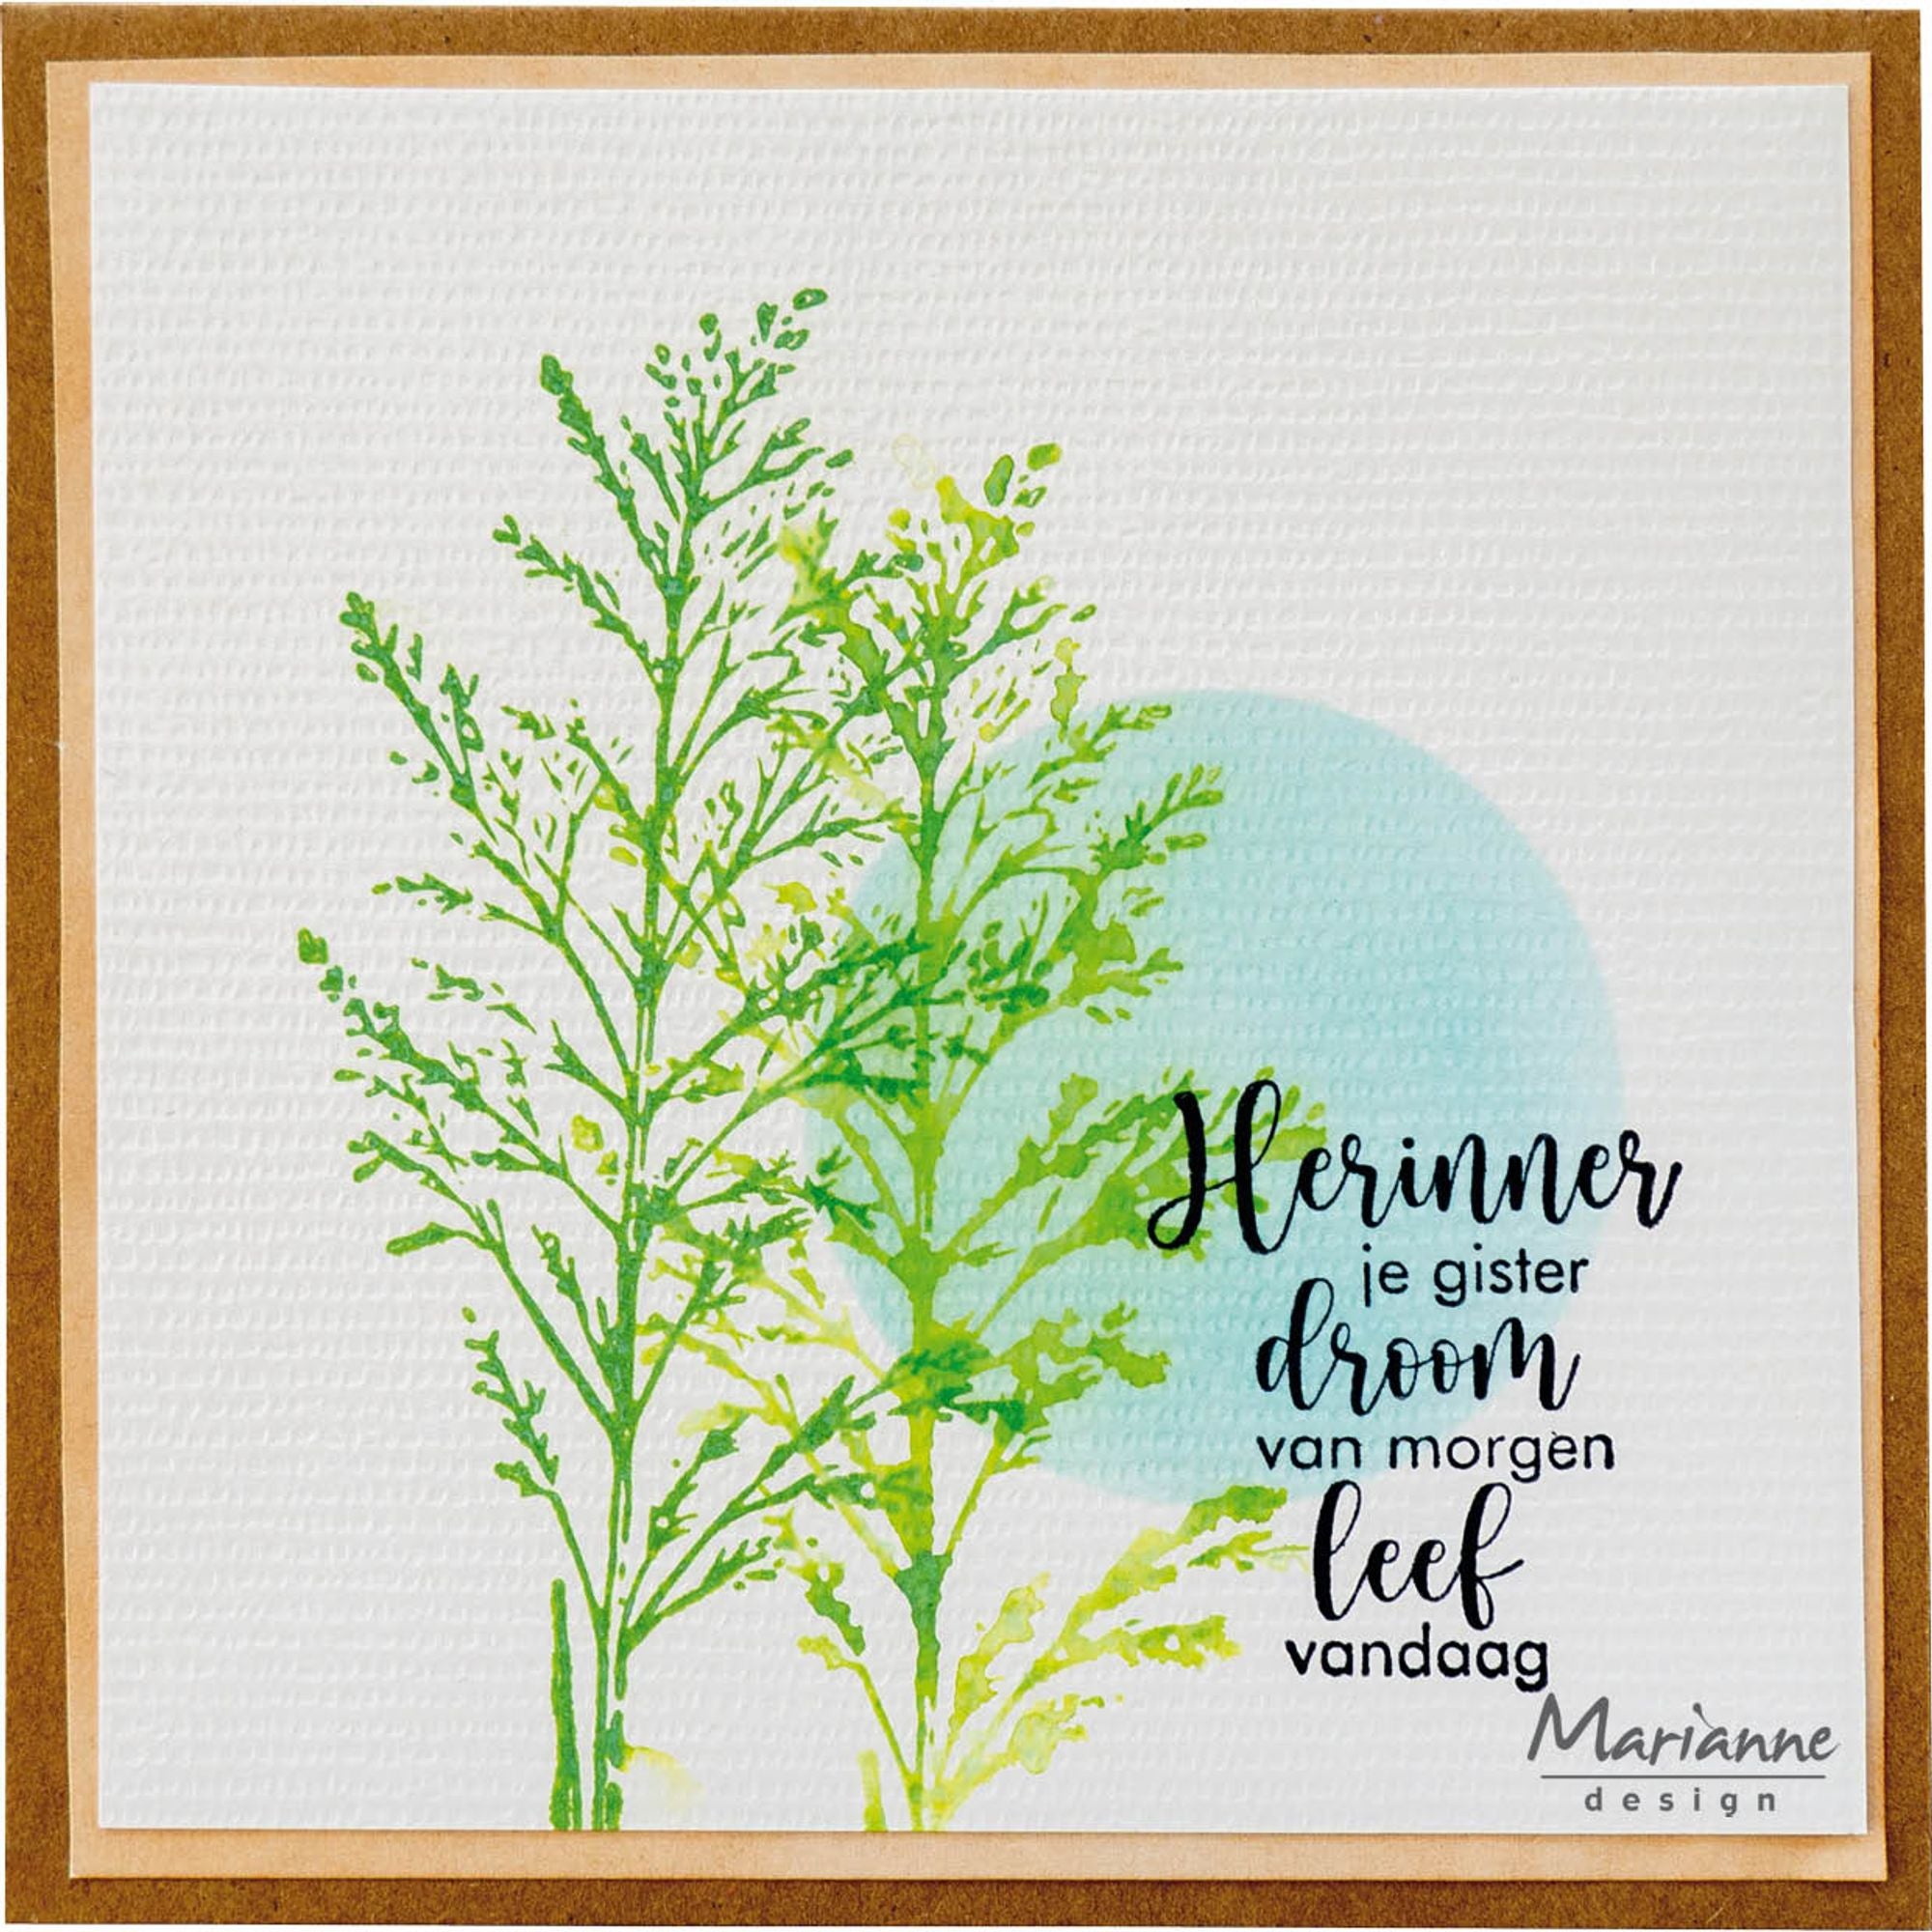 Marianne Design Clear Stamp - Tiny's Border - Indian Grass